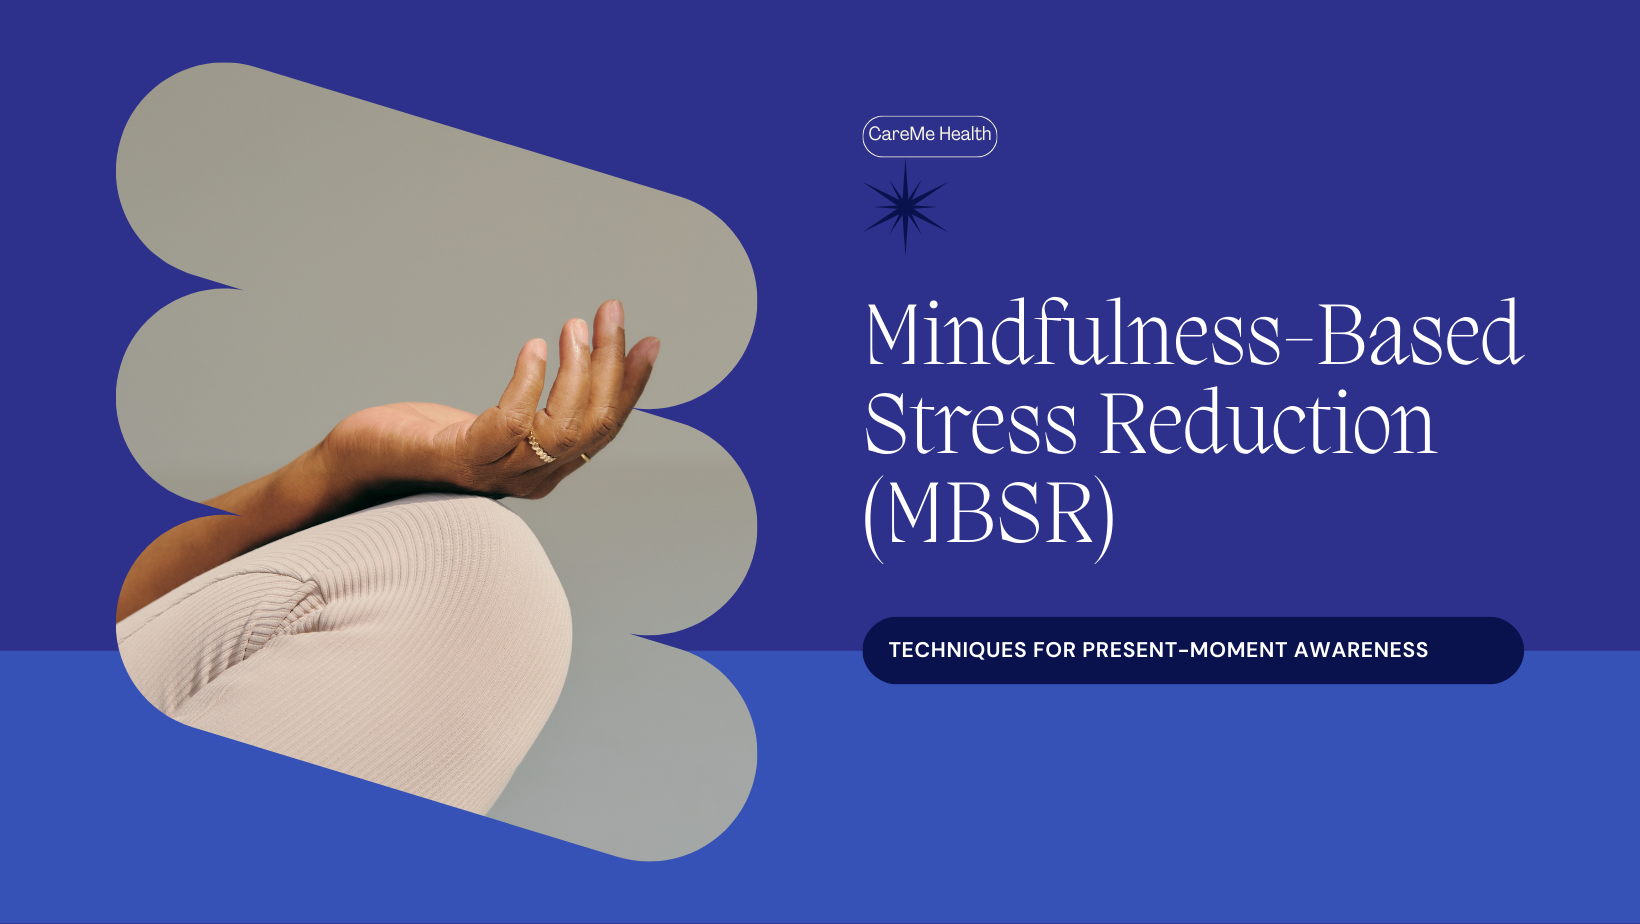 Mindfulness-Based Stress Reduction (MBSR): Techniques for Present-Moment Awareness